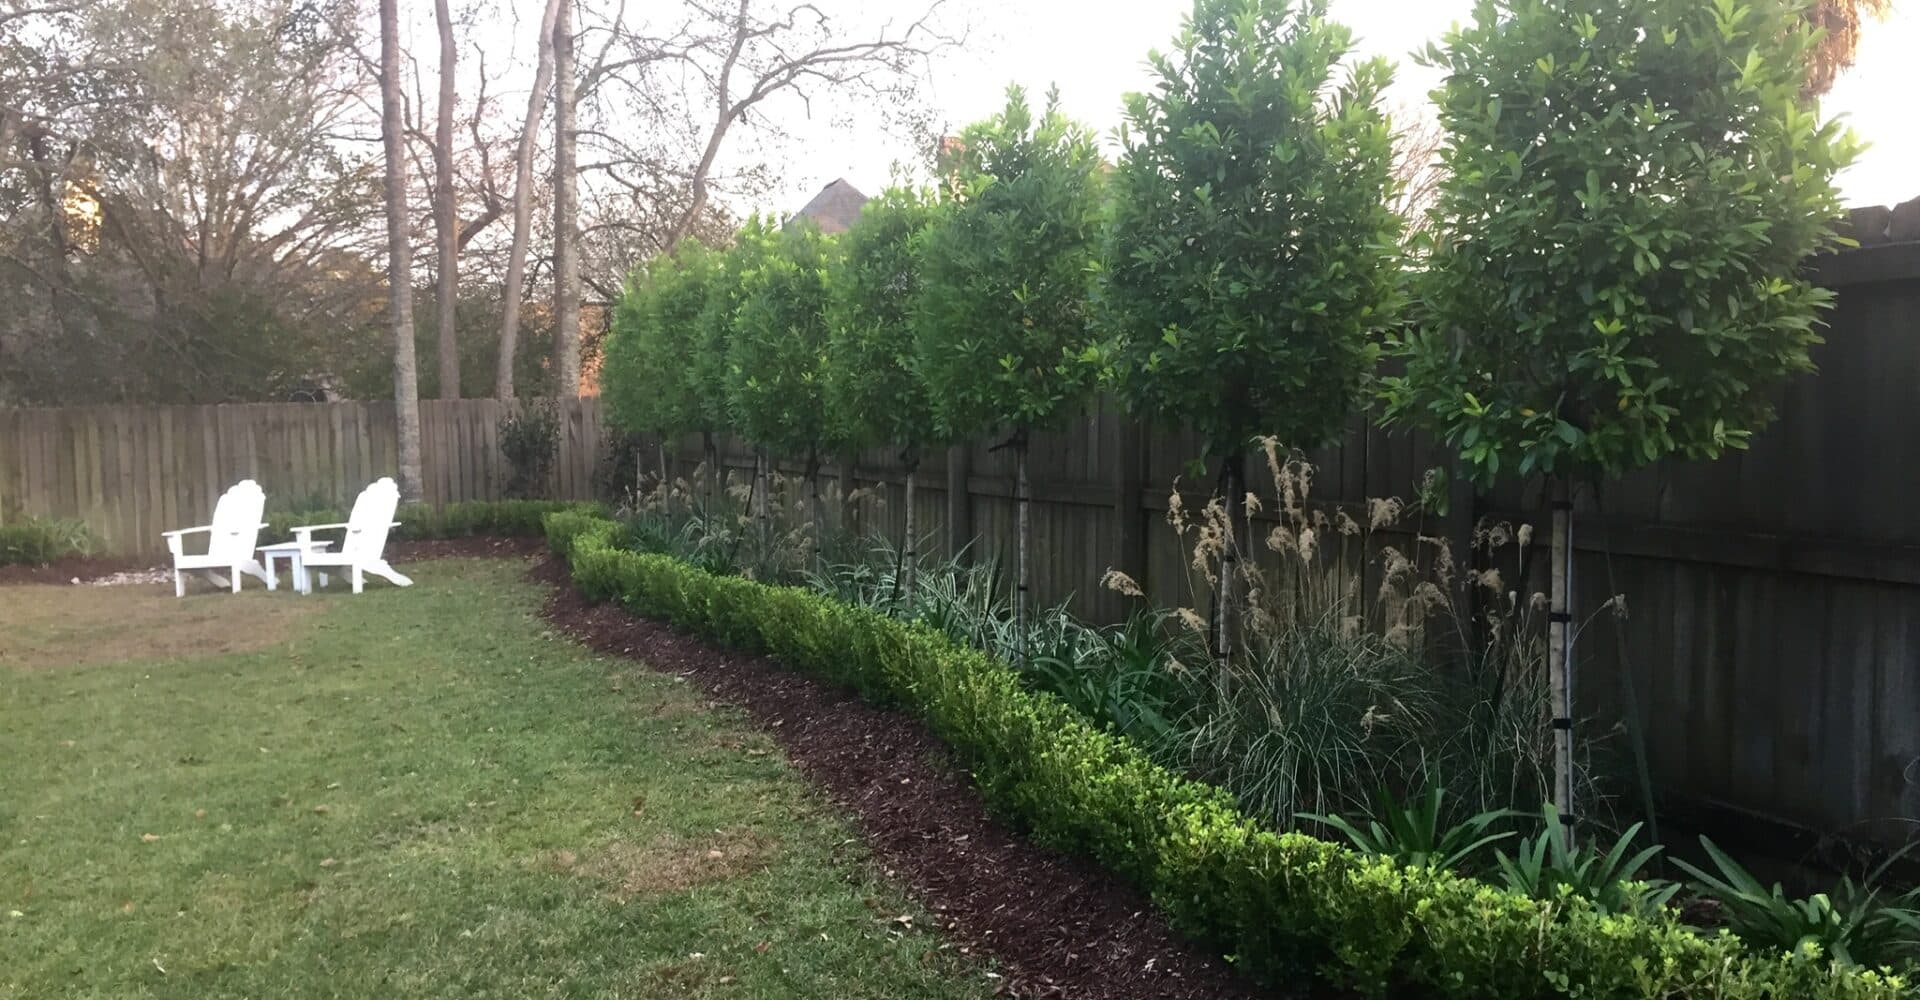 Formal & Woodsy Backyard Landscape Design And Architecture - Baton Rouge